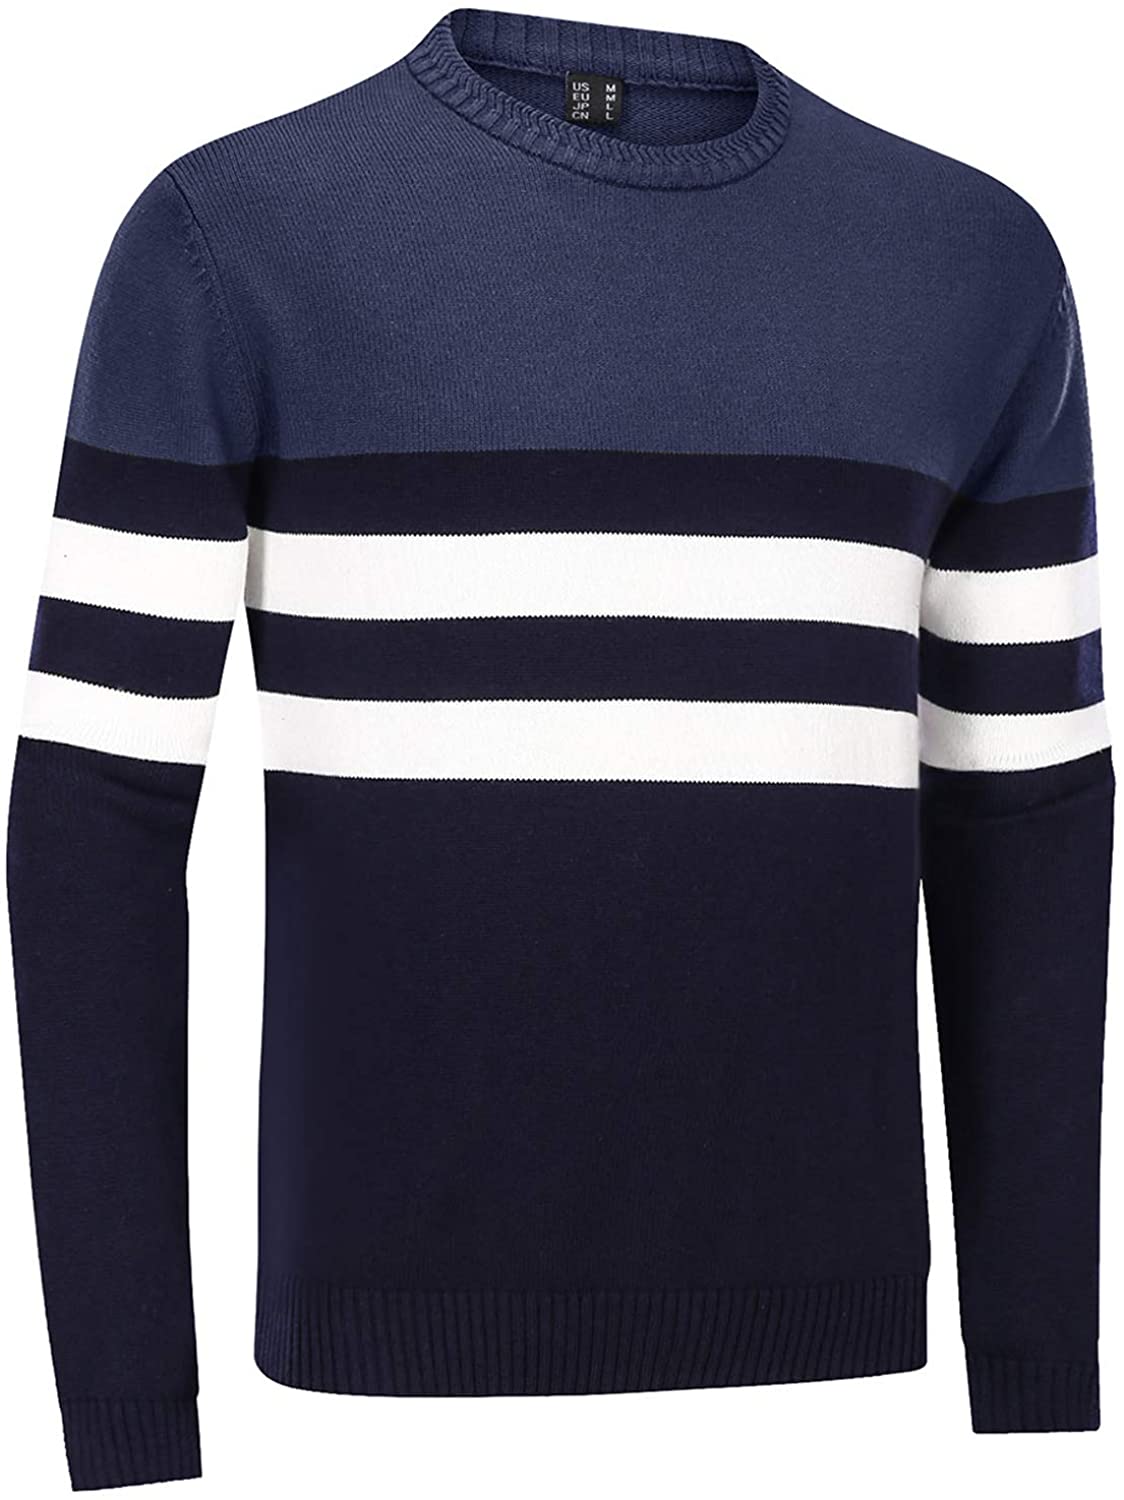 Mens New Striped Knitwear Knitted Crew Neck Casual Pullover Sweater Jumper Top 